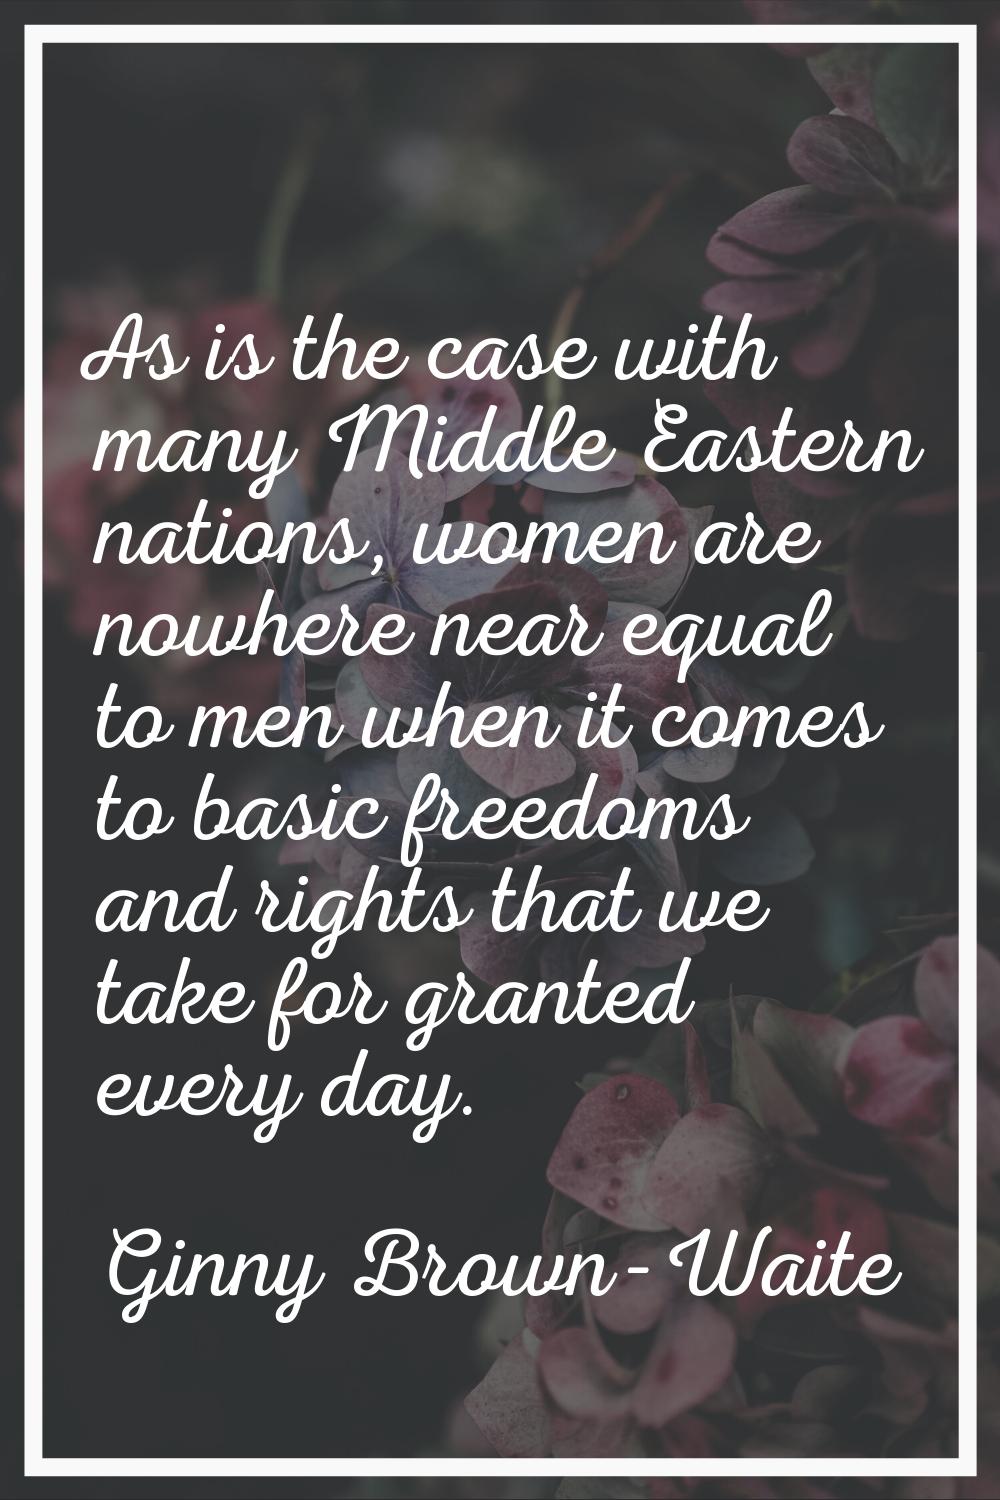 As is the case with many Middle Eastern nations, women are nowhere near equal to men when it comes 